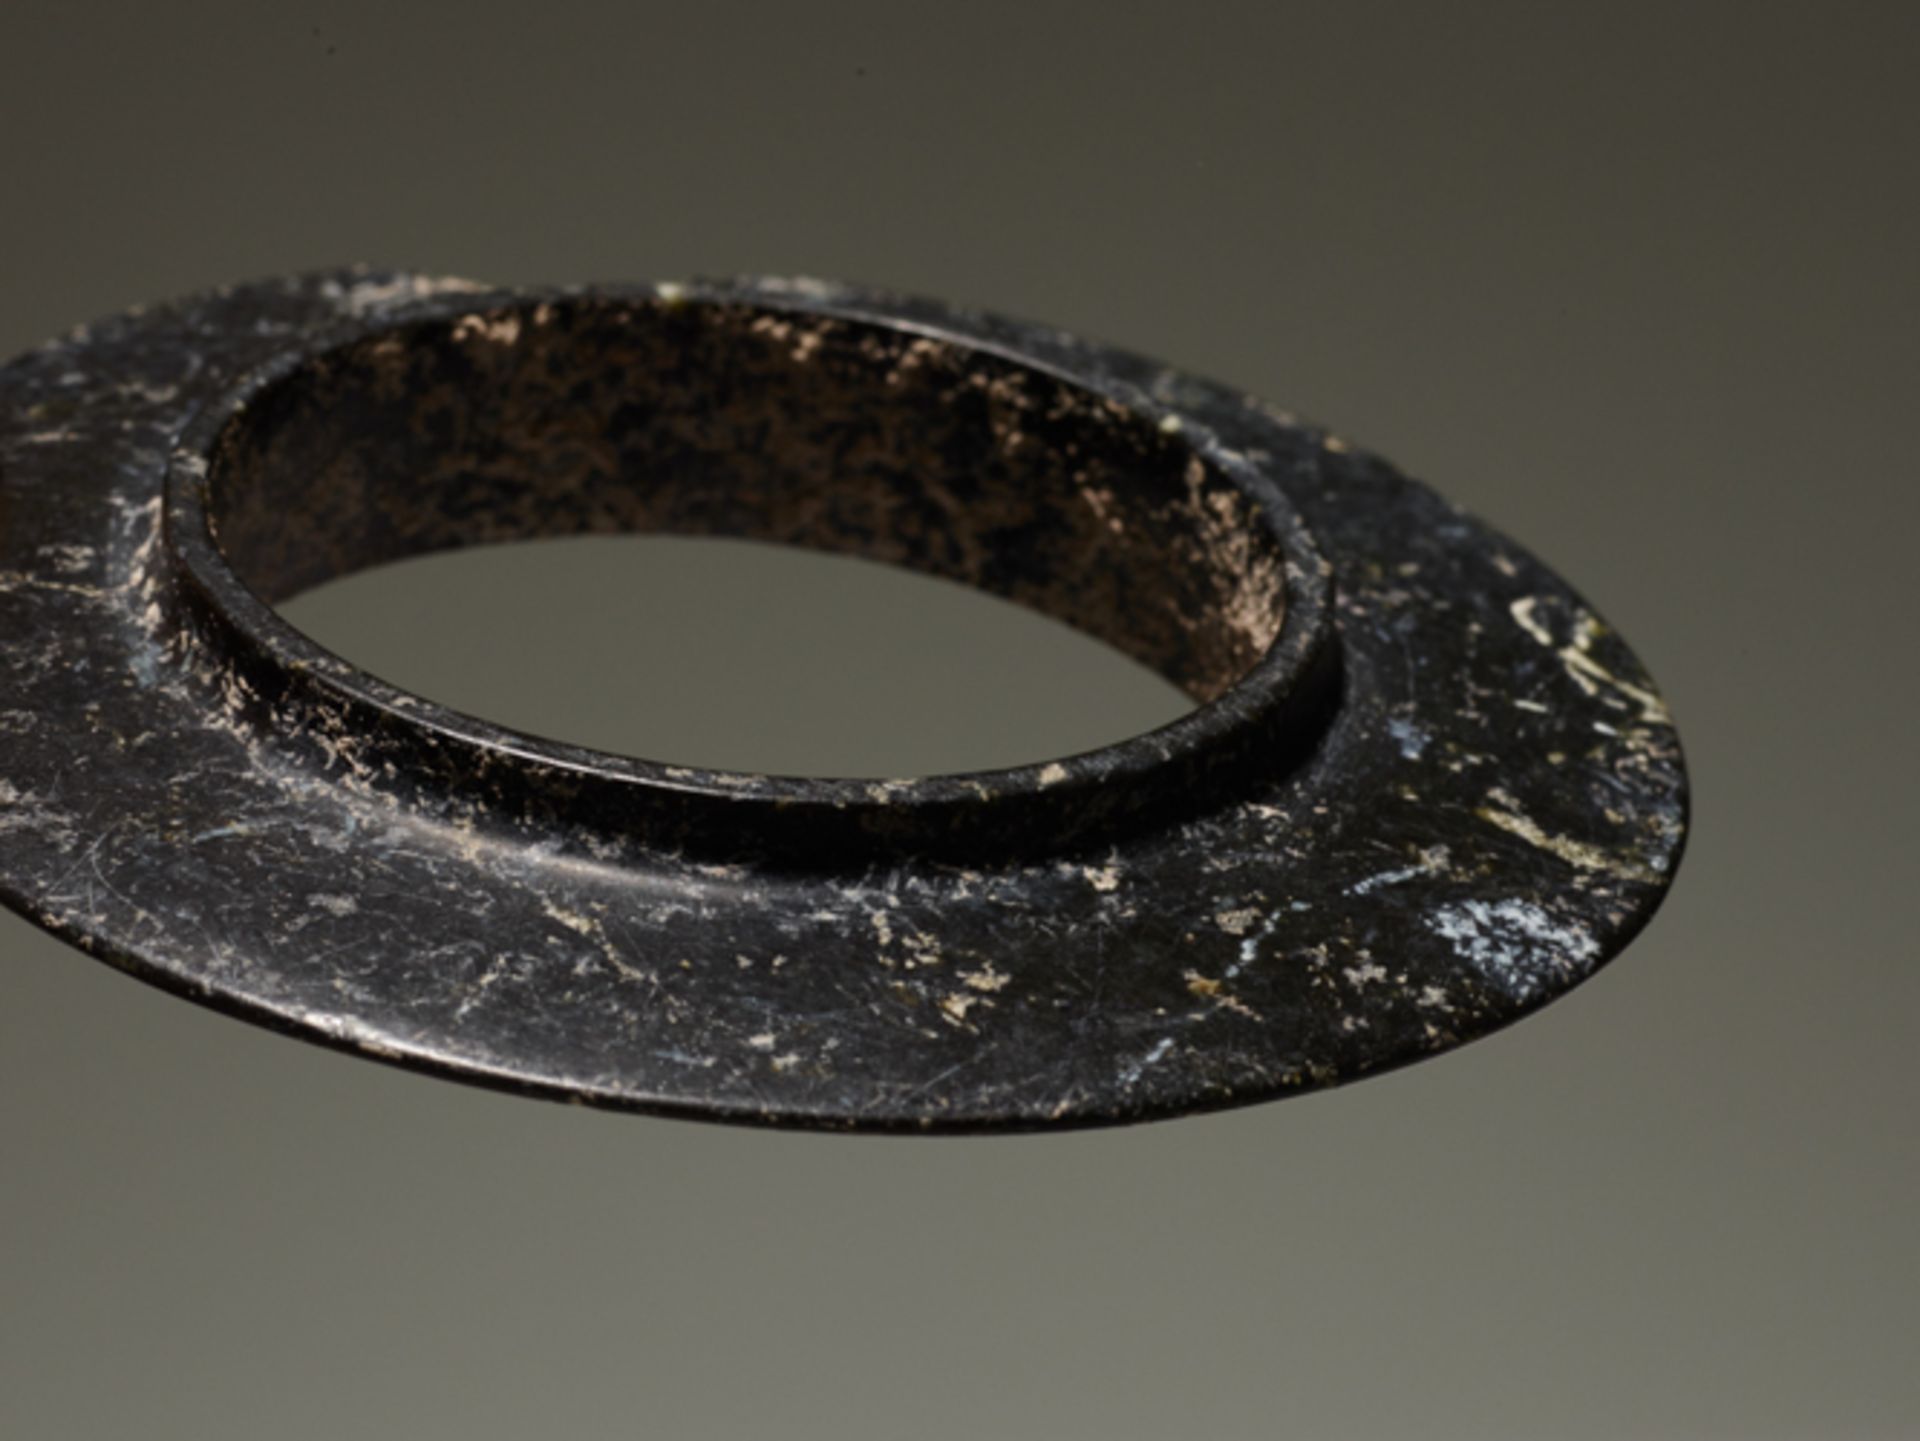 PAIR OF COLLARED YUAN RINGSJade. China, Late Shang dynasty, ca. 1200 BCThe two collared rings in the - Image 3 of 6